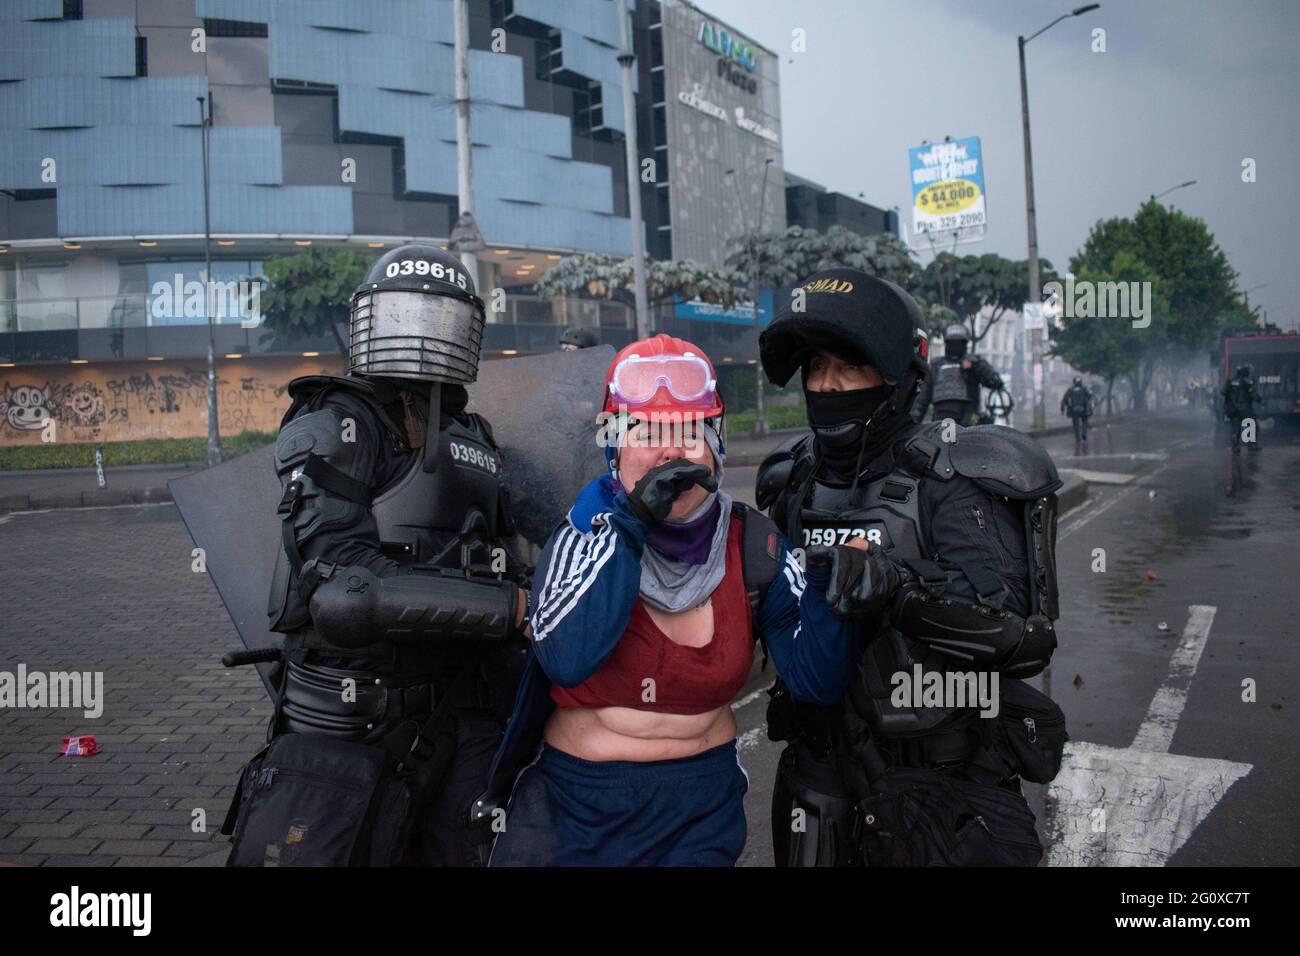 Bogota, Cundinamarca, Colombia. 2nd June, 2021. Members of the police from the mobile riot squad (ESMAD) capture a demonstrator from the so-called first line during a new day of anti-government protest in BogotÃ¡, Colombia against the government of President IvÃ¡n Duque and police brutality on June 2, 2021 Credit: Daniel Romero/LongVisual/ZUMA Wire/Alamy Live News Stock Photo